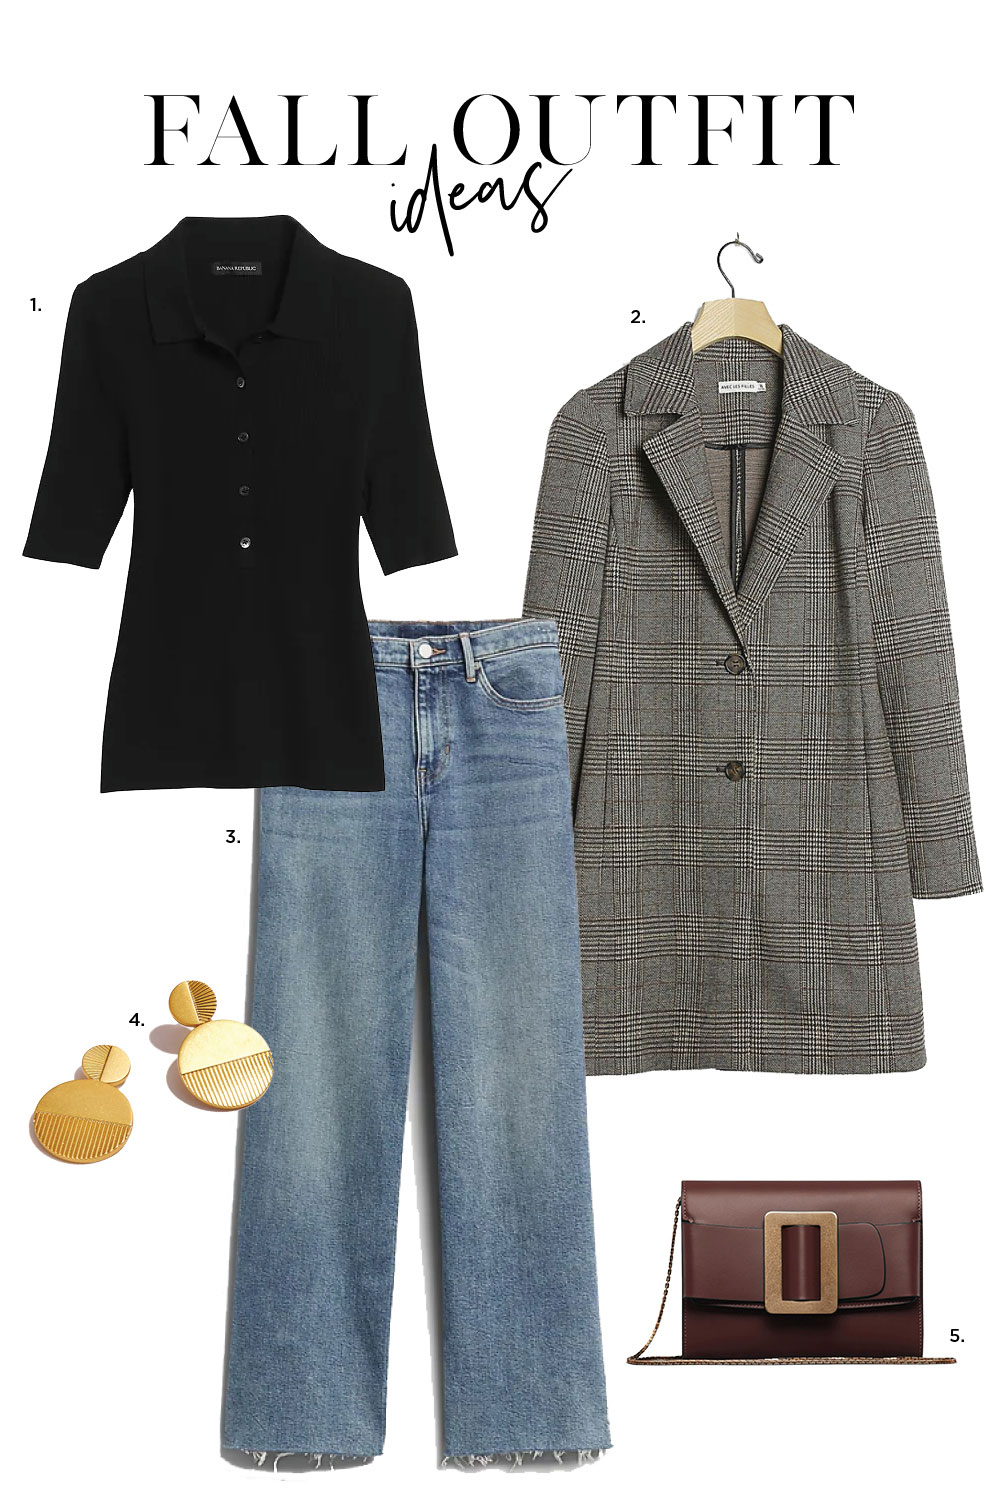 Fall Fashion Must Haves For Moms - House Of Hipsters